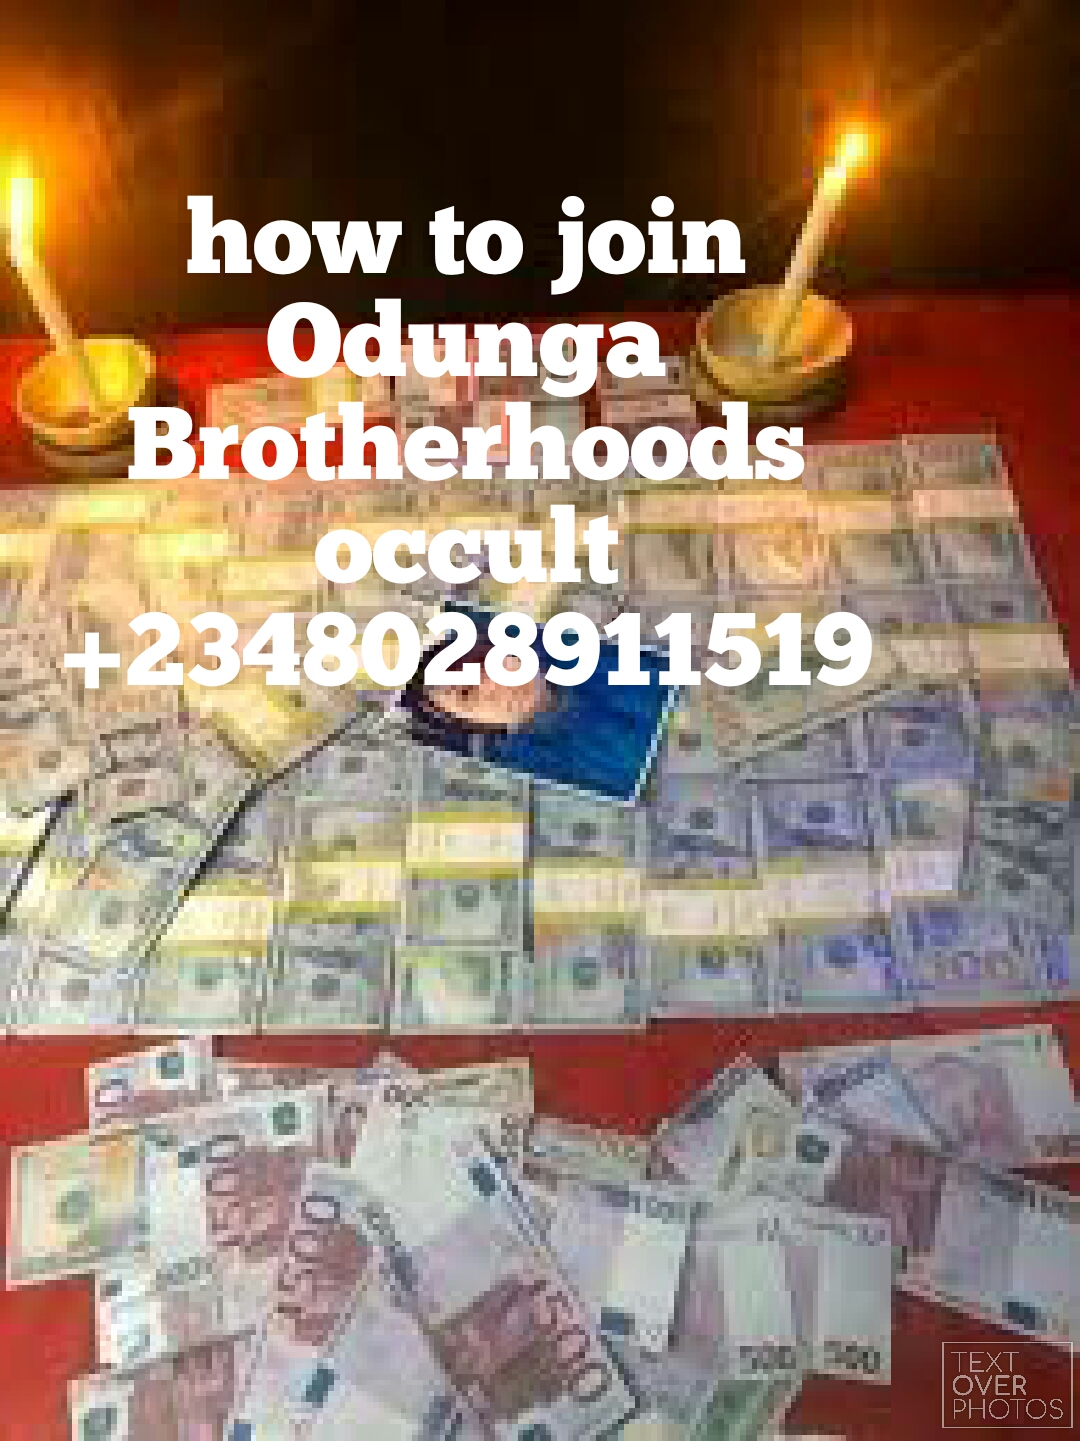 [{}] ©™+2348028911519 [{}] ©® I WANT TO JOIN OCCULT TO WIN ELECTI,Nsukka enugu Nigeria ,Furniture,Sofa & Dining